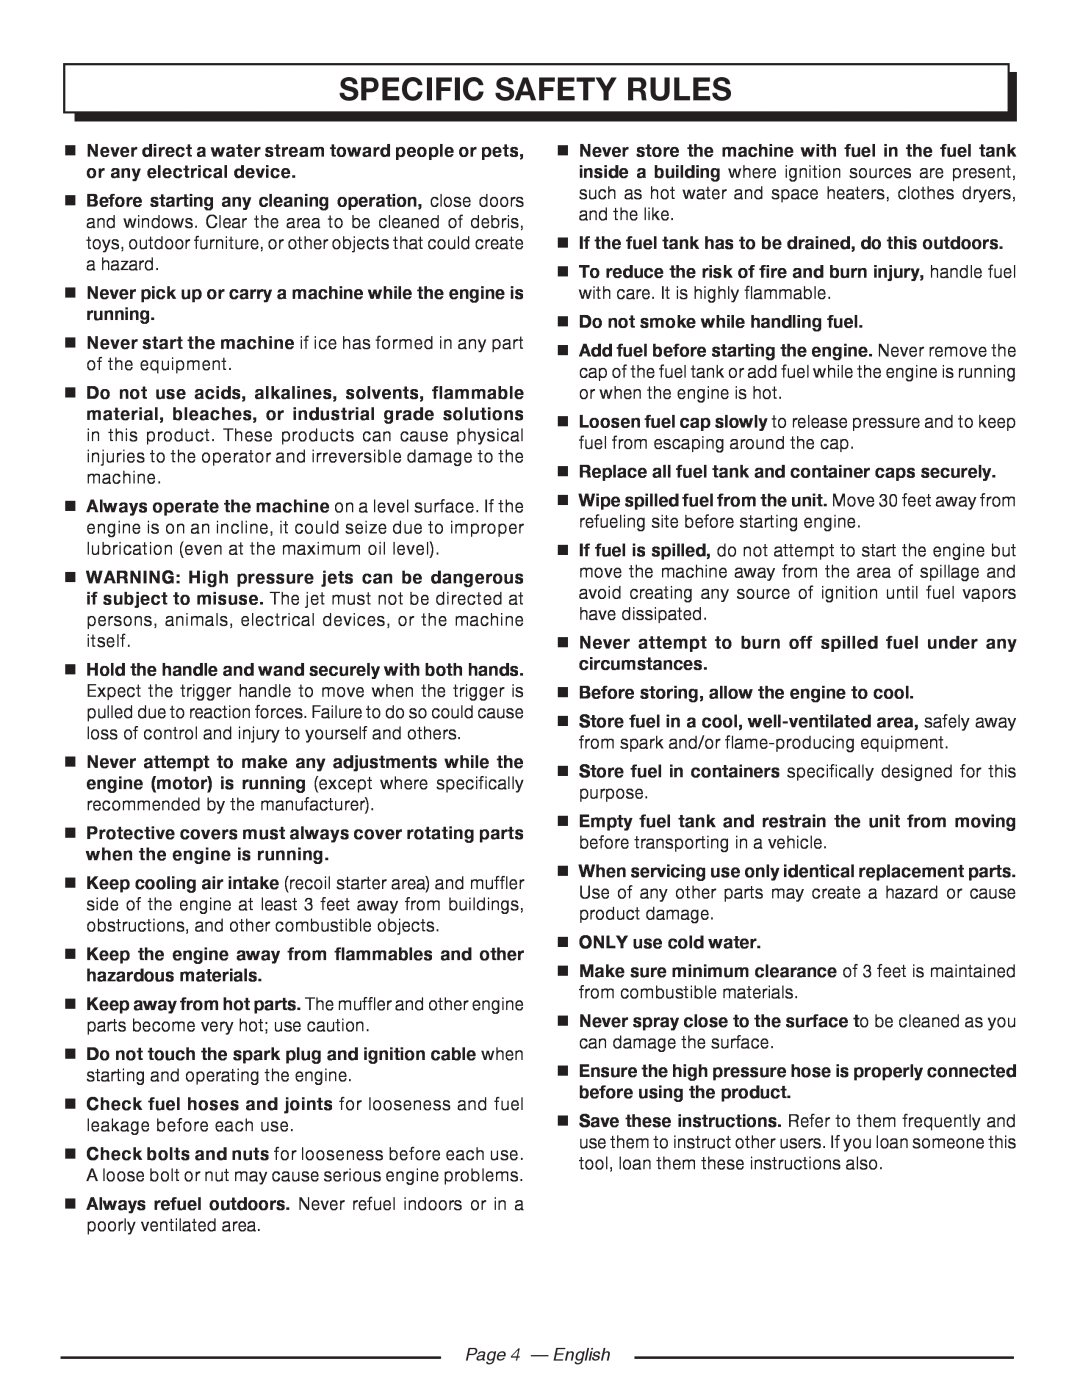 Homelite UT80993 Specific Safety Rules,  Never pick up or carry a machine while the engine is running, Page 4 - English 